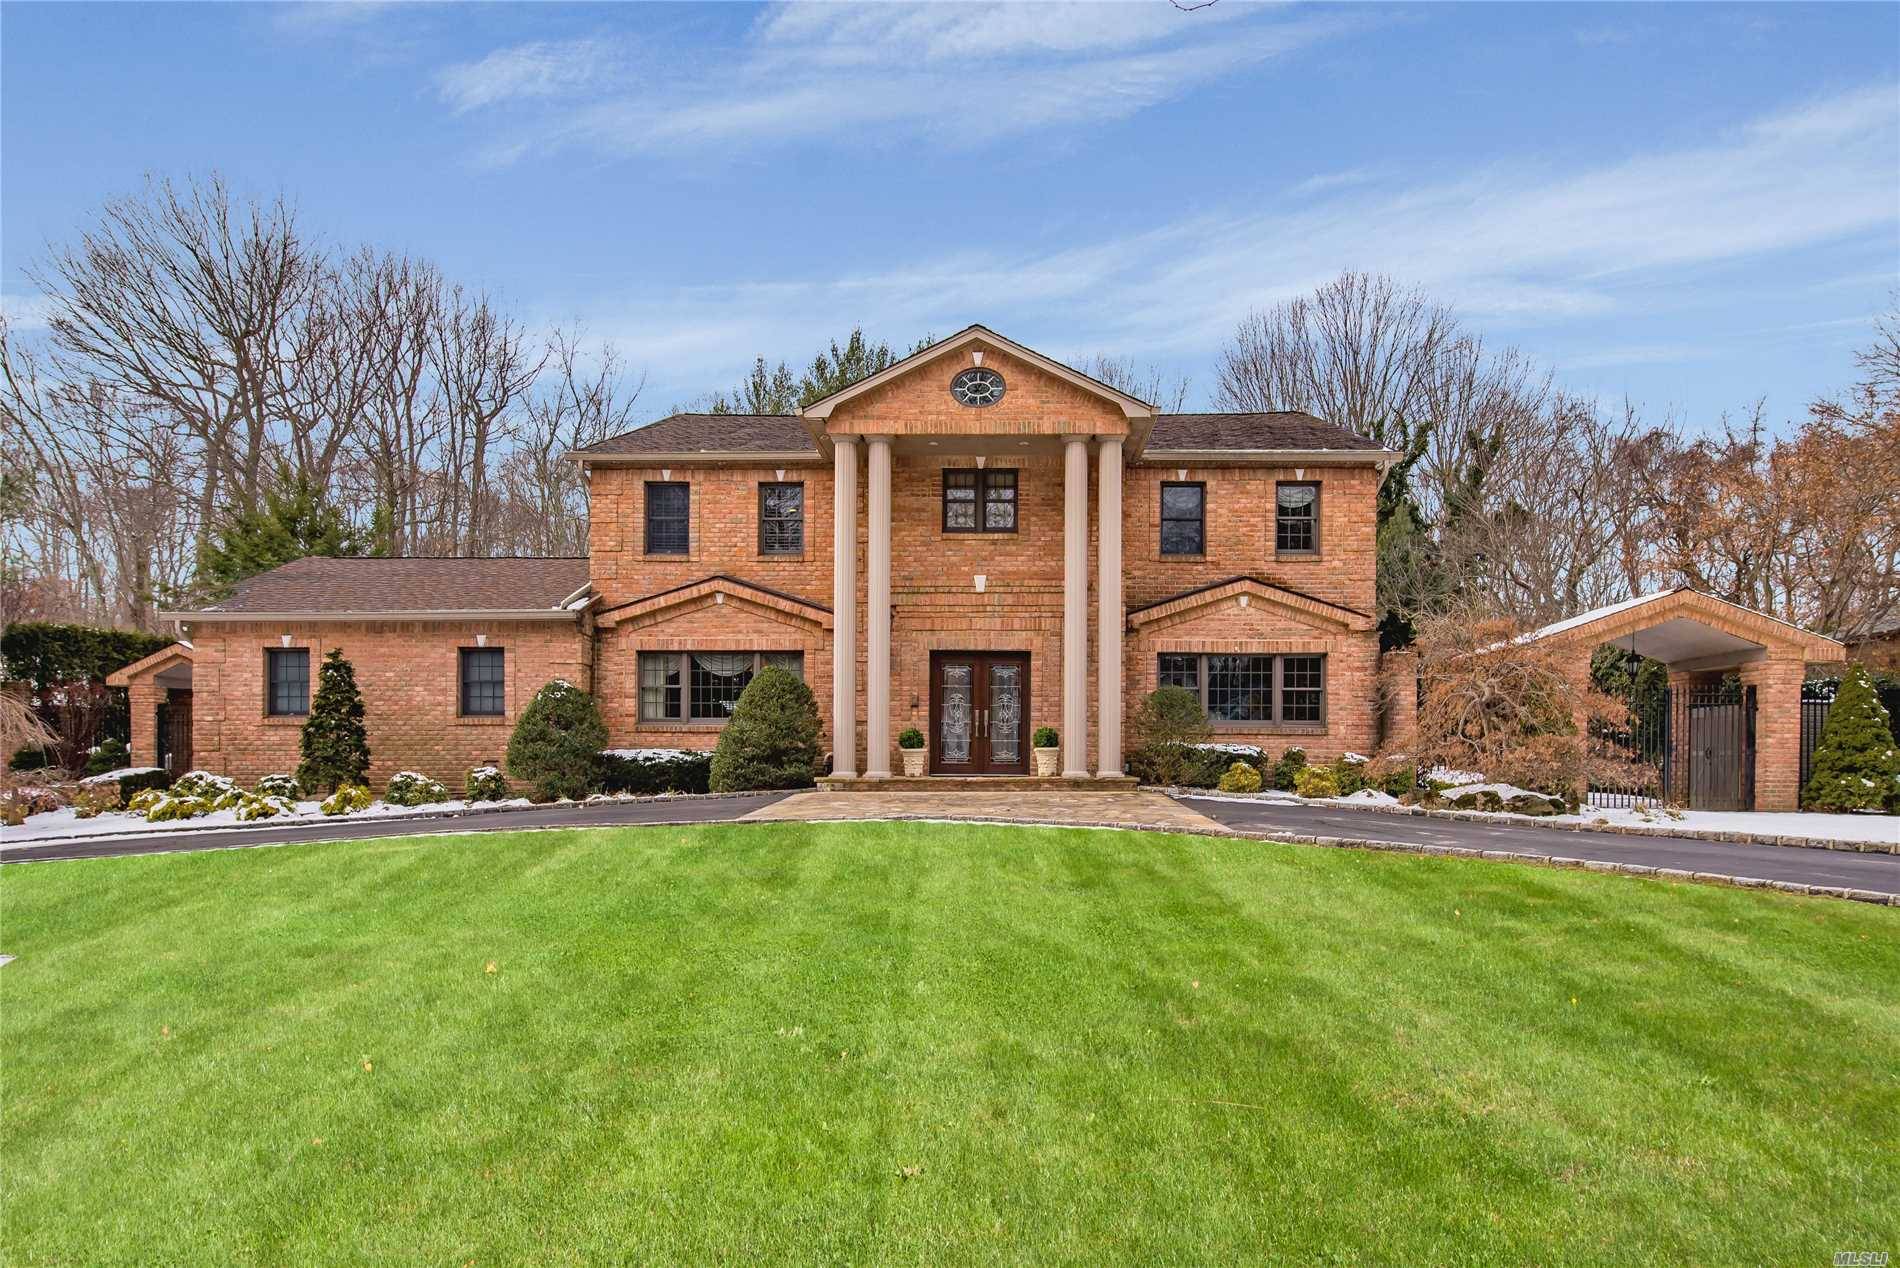 Richly Detailed Spacious & Stately Brick Colonial In Hhh Sd.